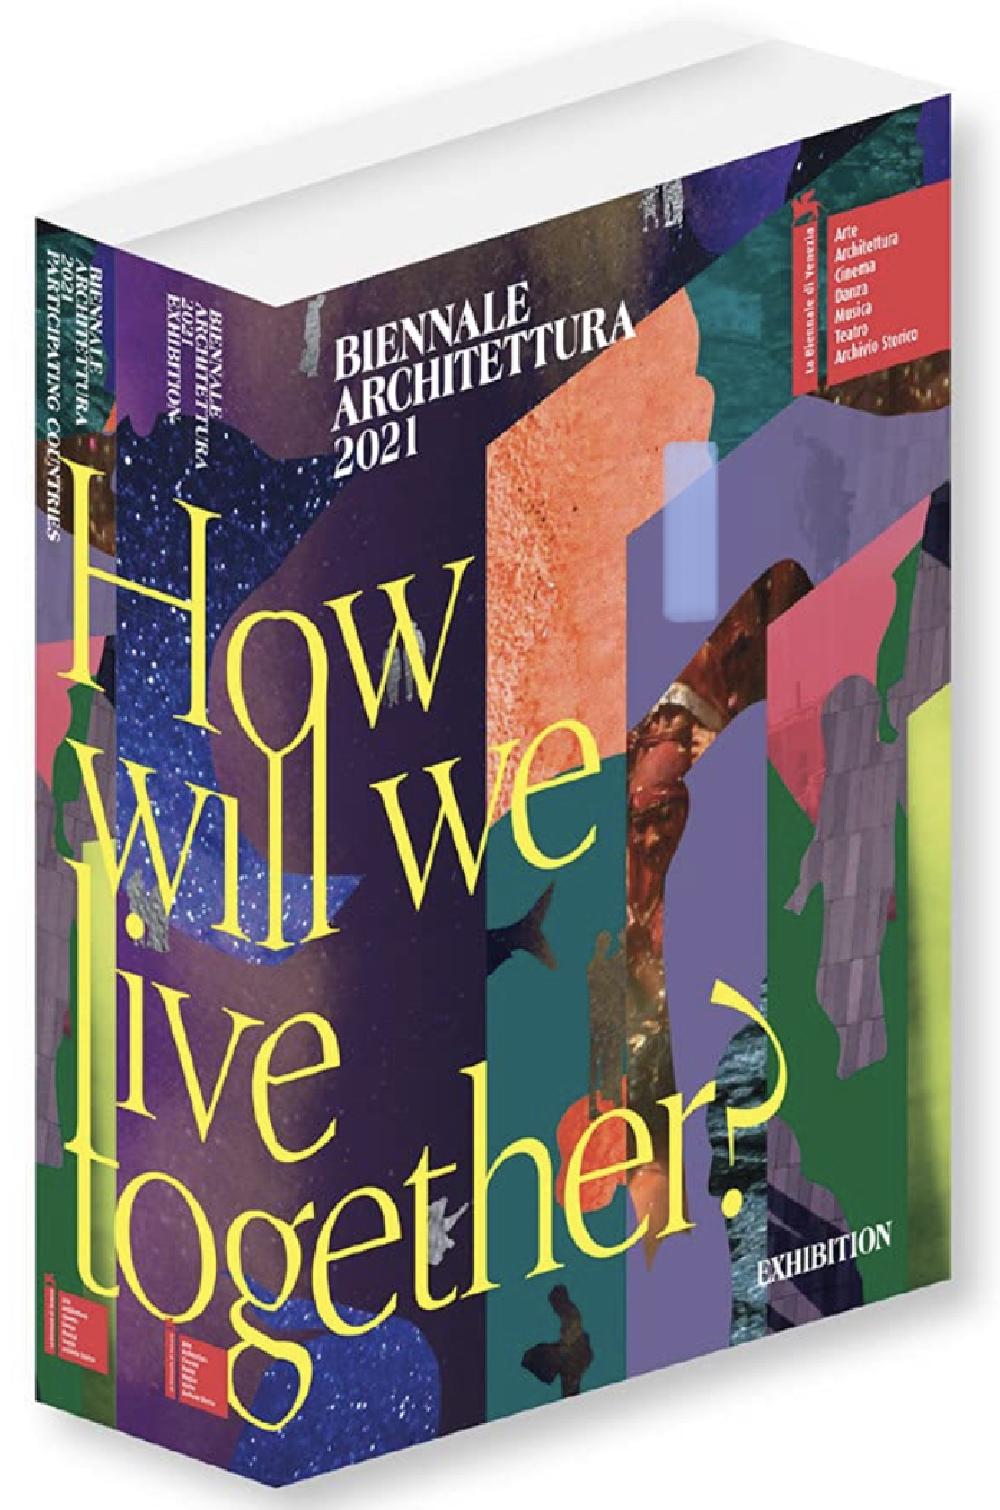 Biennale Architettura 2021 - How Will We Live Together?